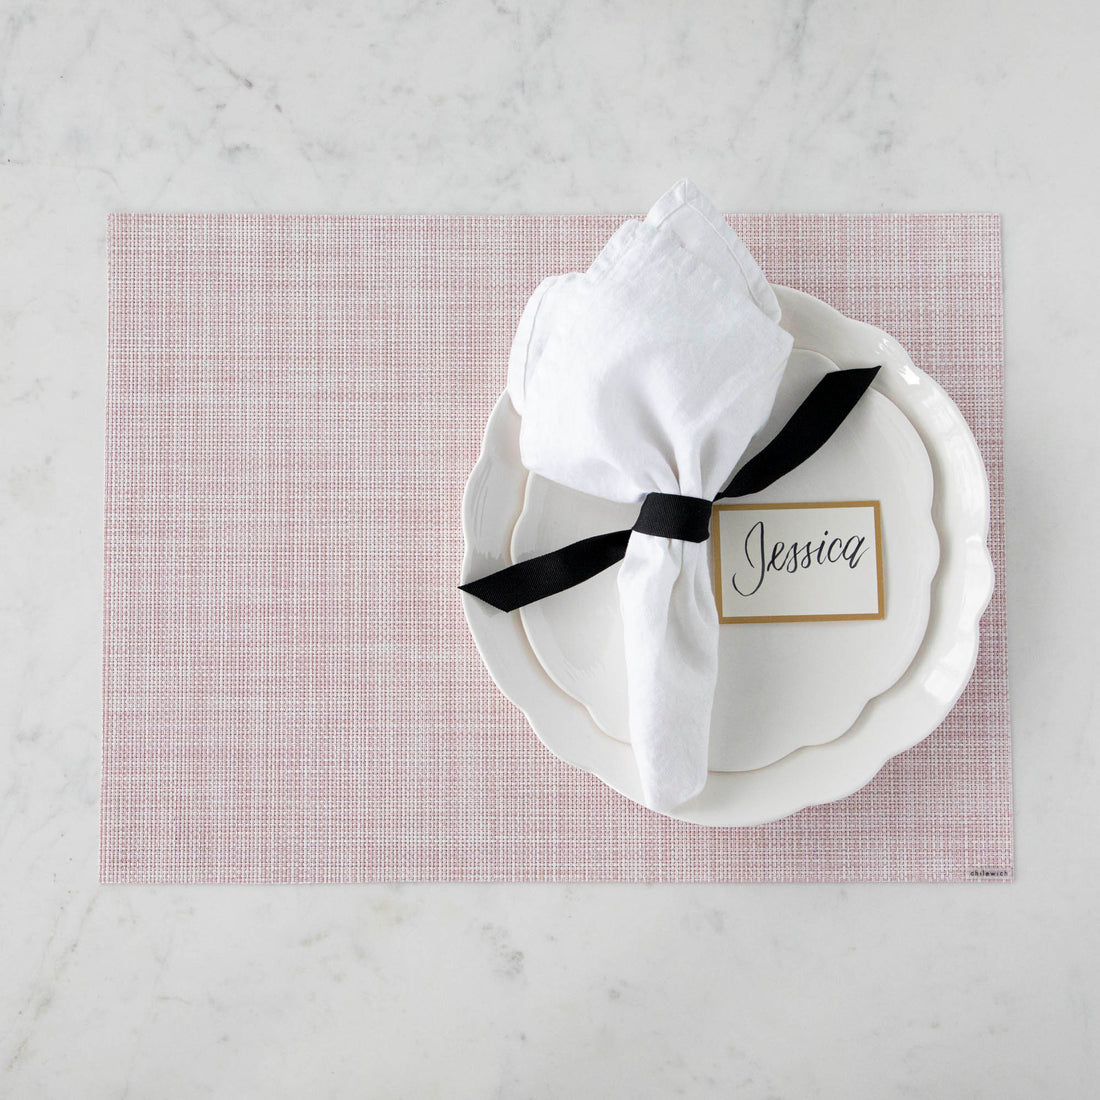 Elegant table setting with a floral theme, featuring pink and white dishes, gold cutlery, Chilewich Blush Mini Basketweave Mats, and personalized name card.